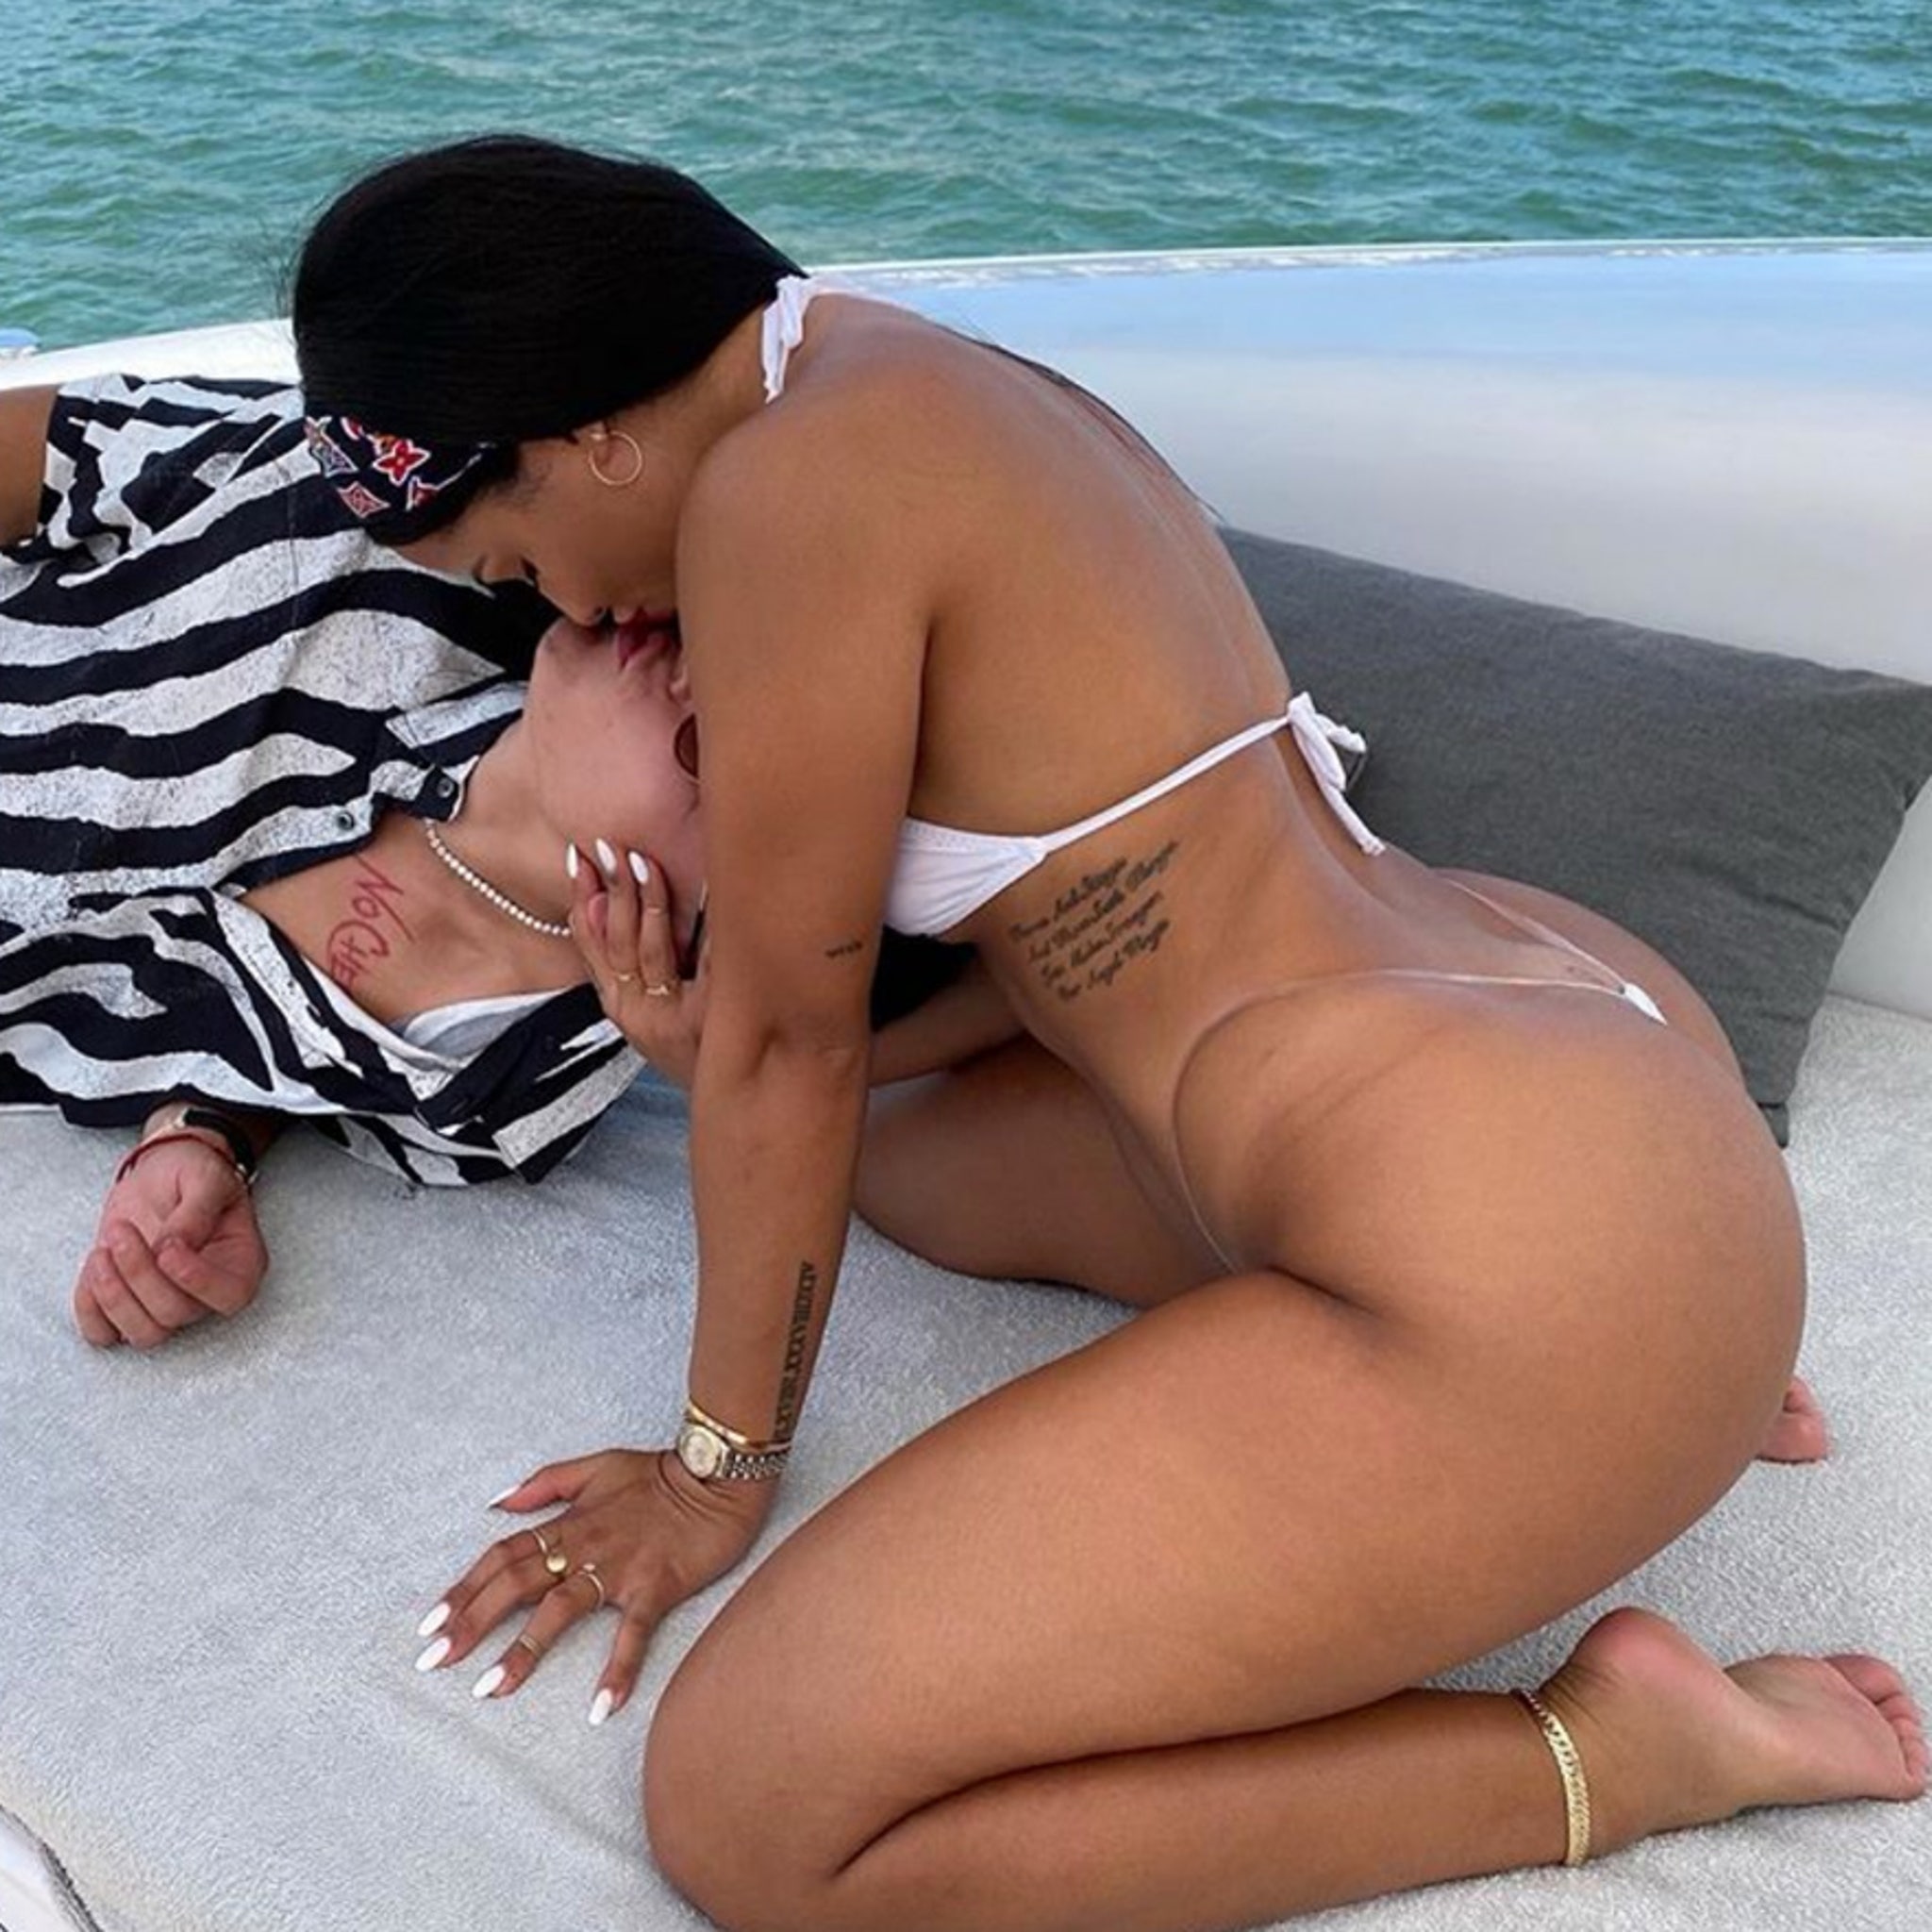 NBAs Tyler Herro Makes Out With Thonged-Out Katya Elise Henry On Boat pic